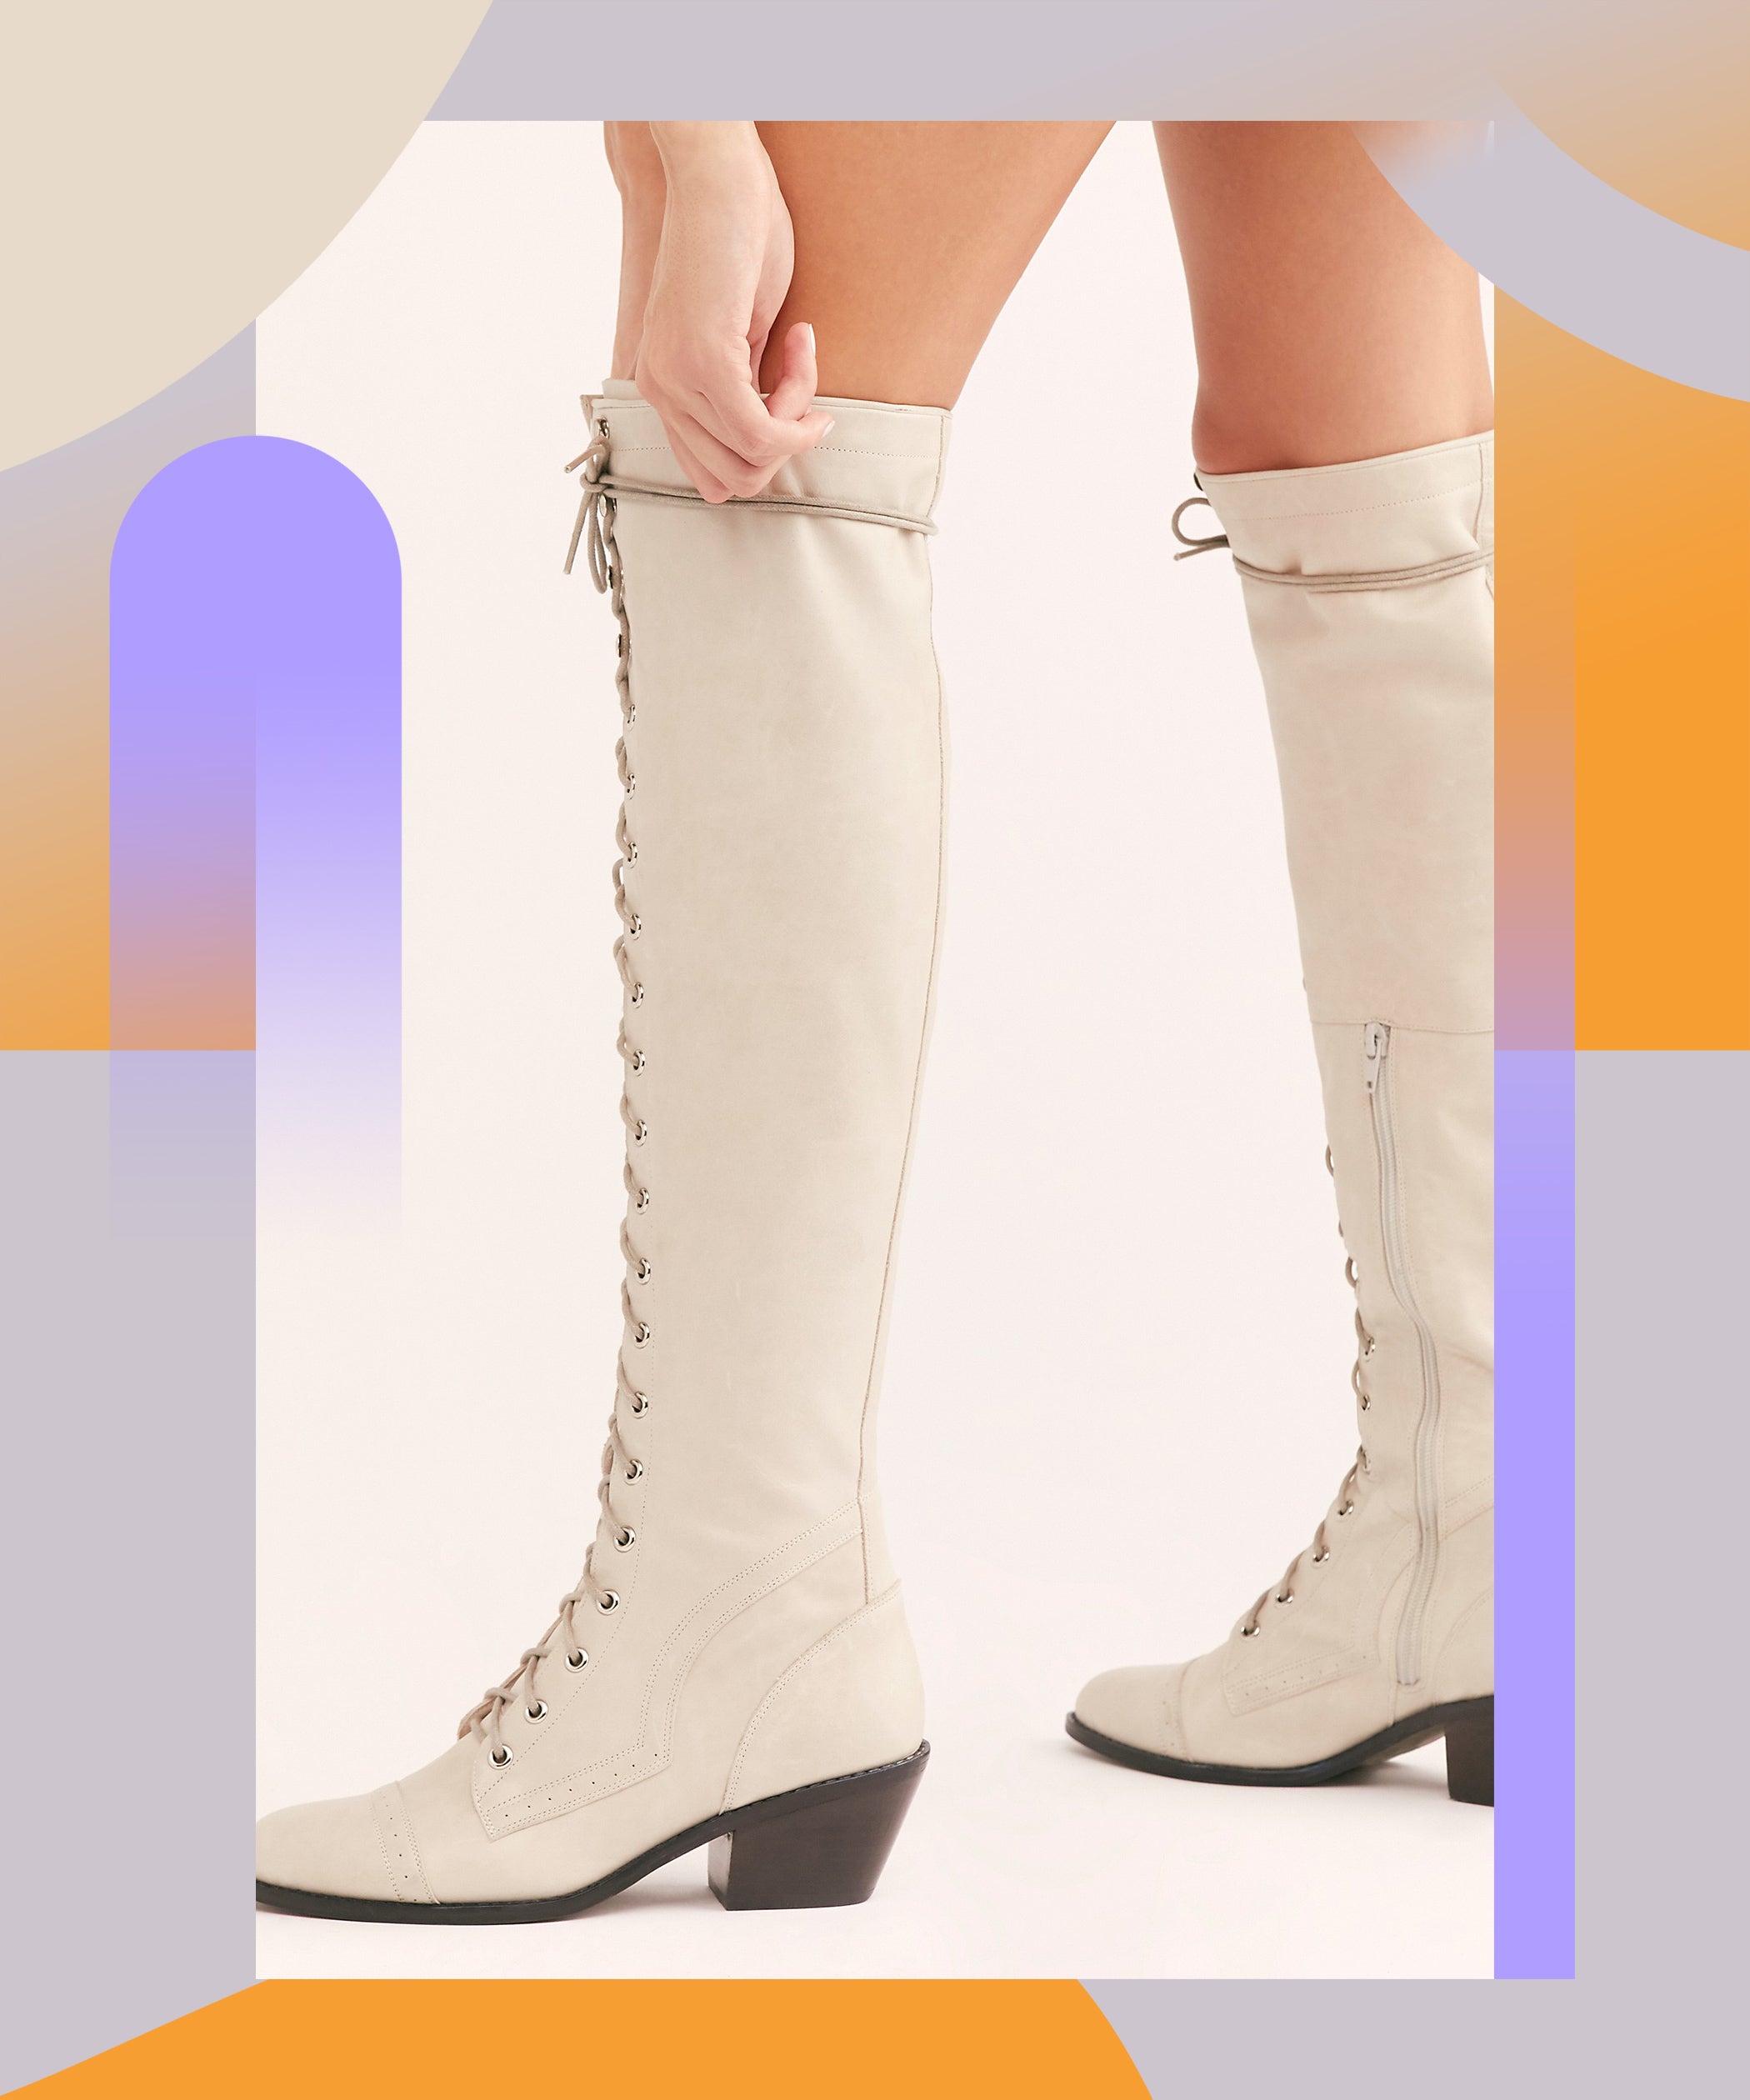 Lace Up Boots For Women Fall Winter 